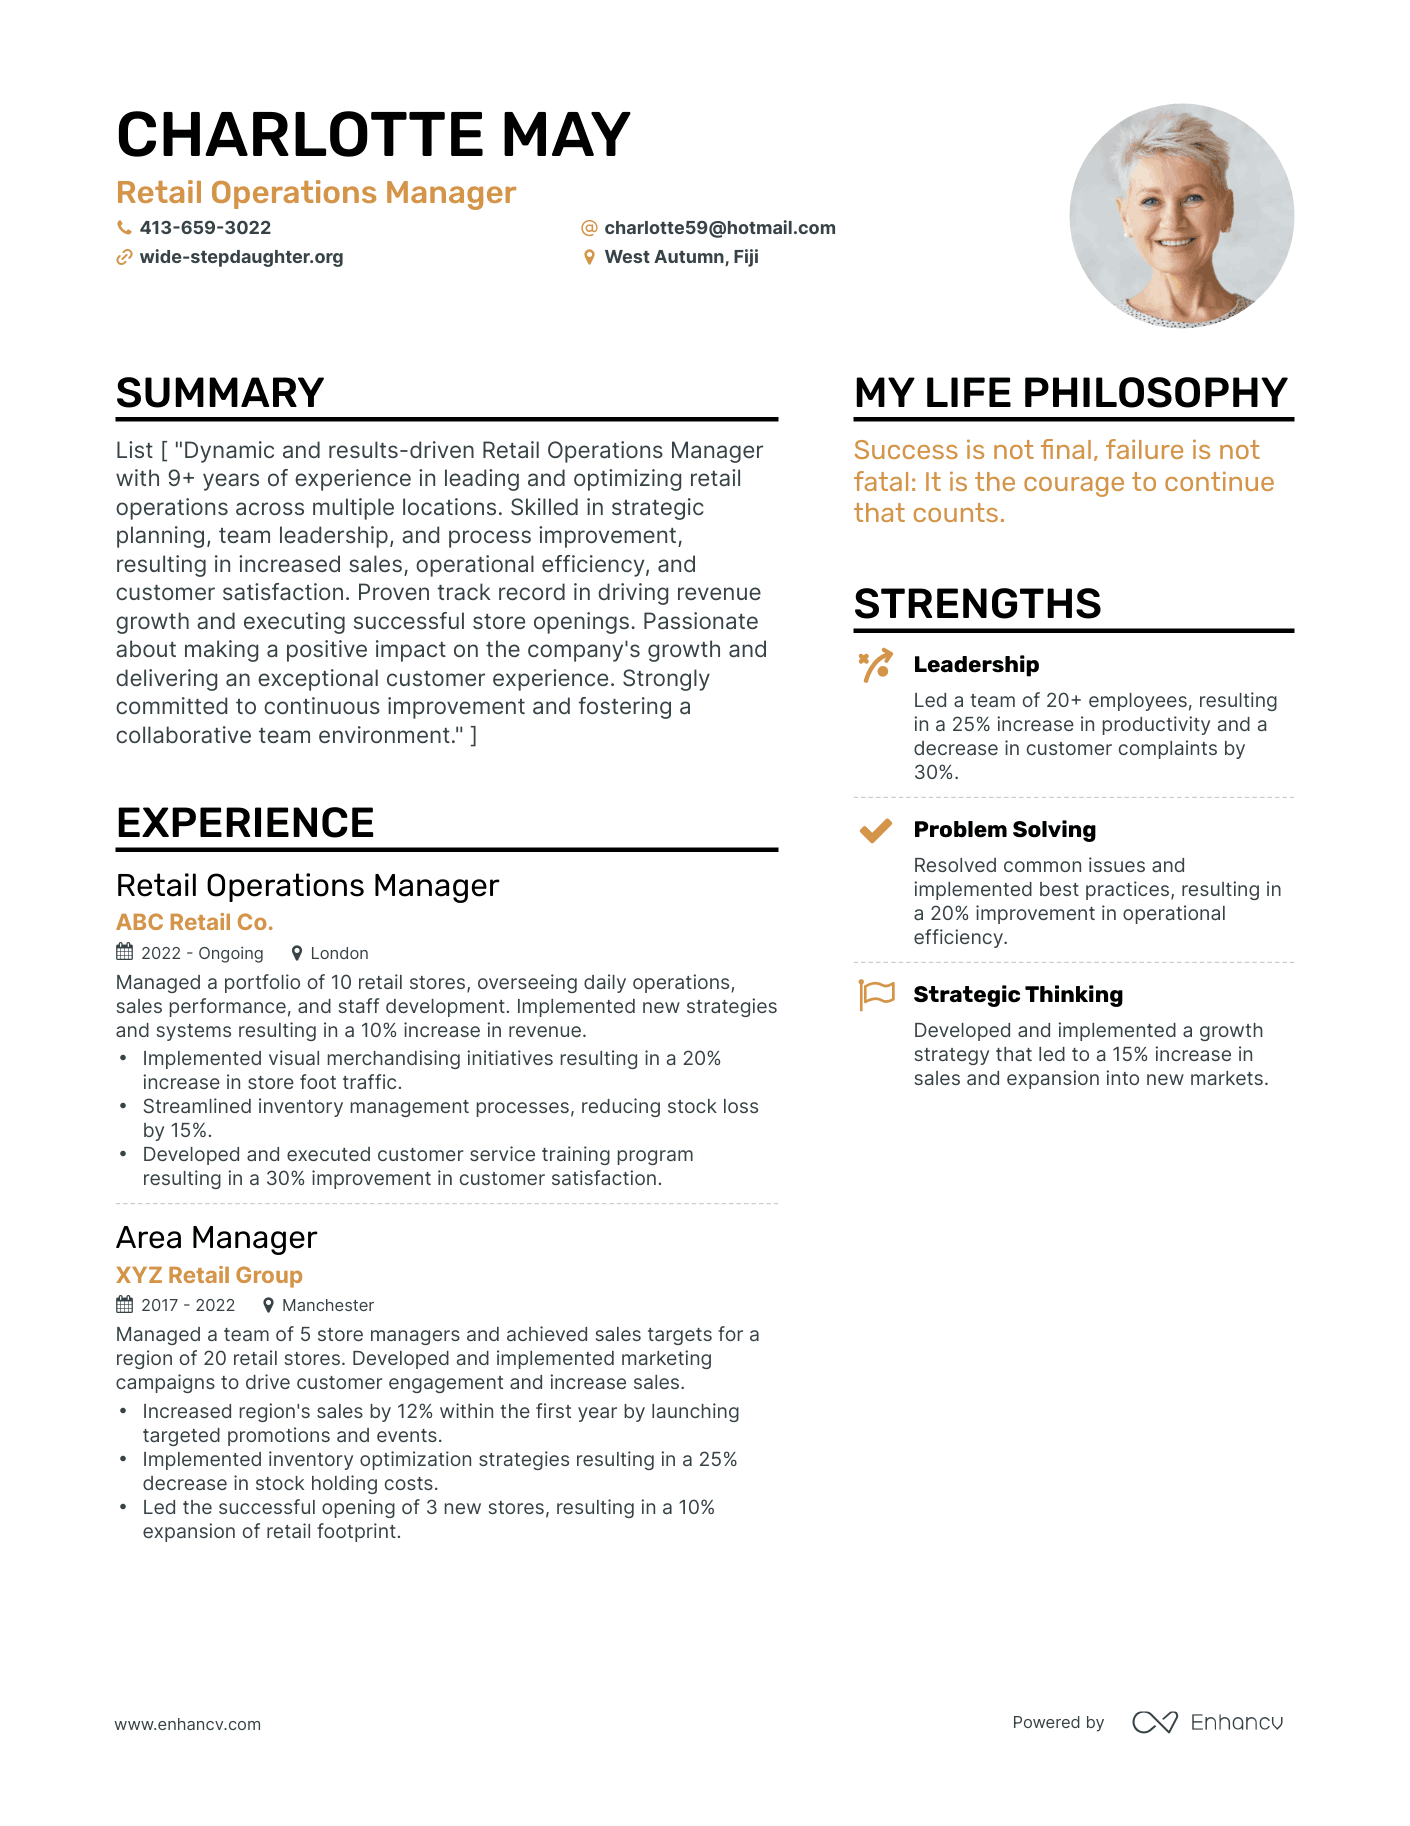 Retail Operations Manager resume example